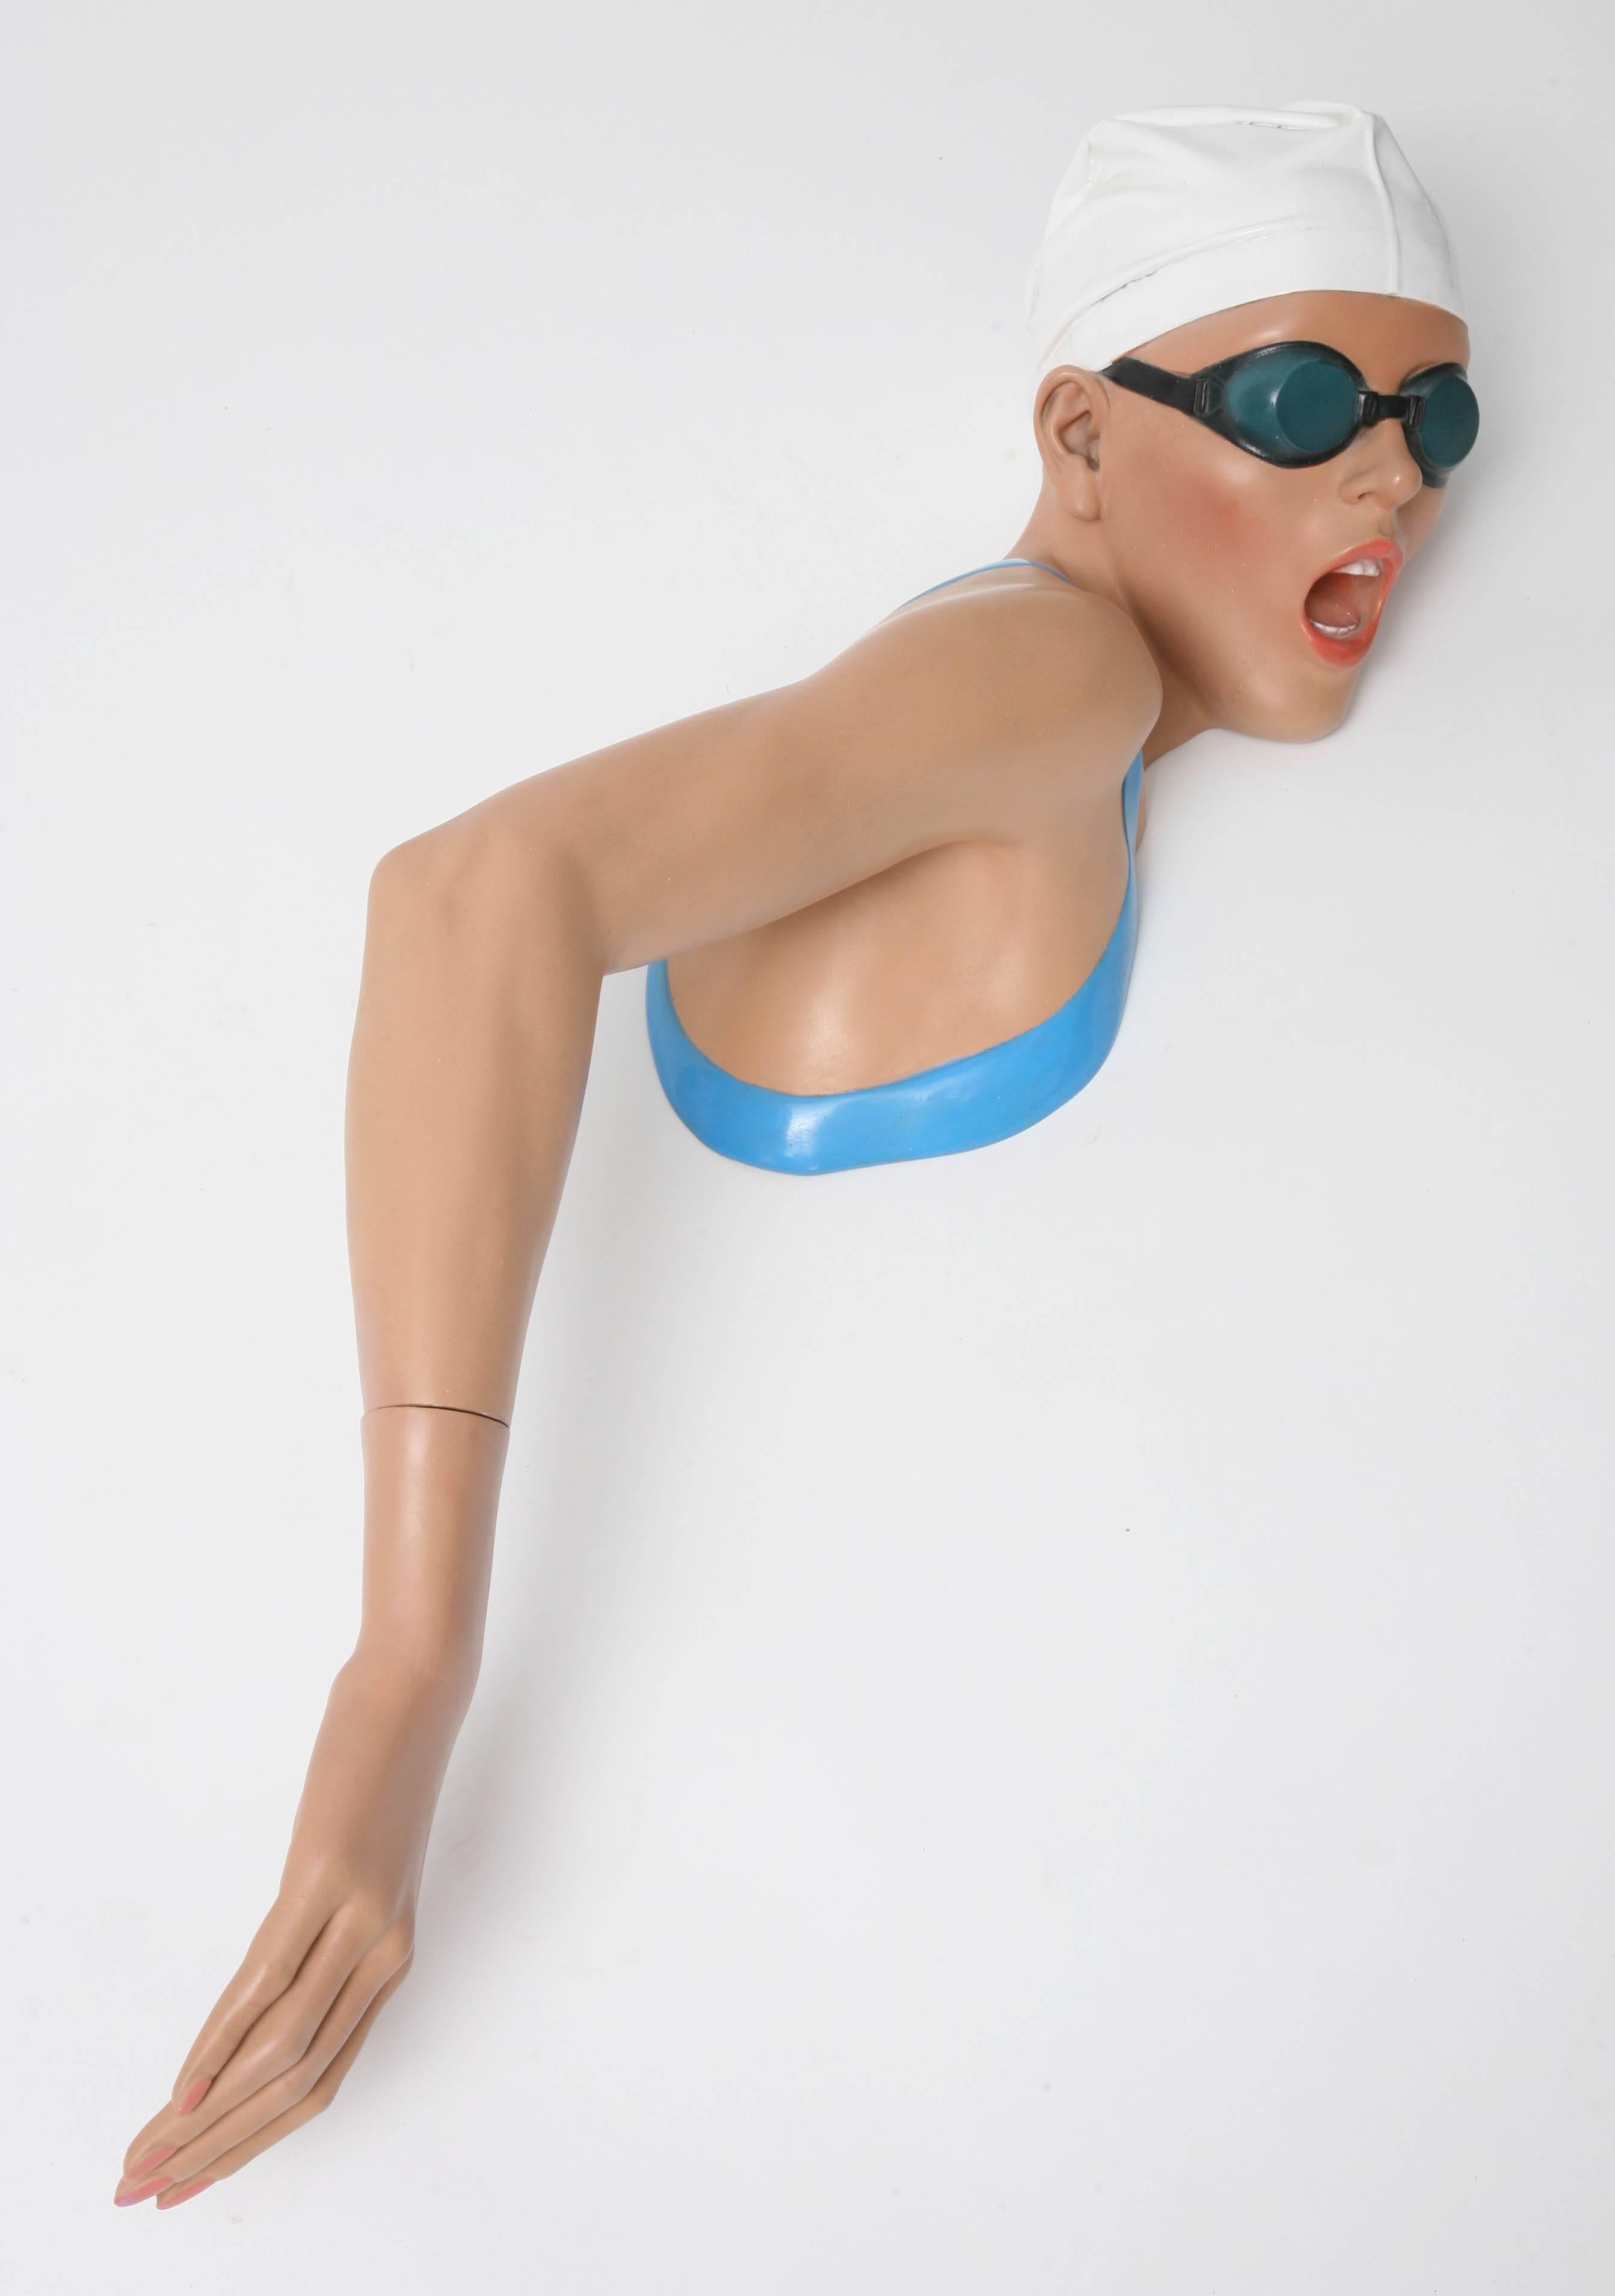 Plastic Life-Like Sculpture of a Swimming Woman in the Style of Carole A. Feuerman